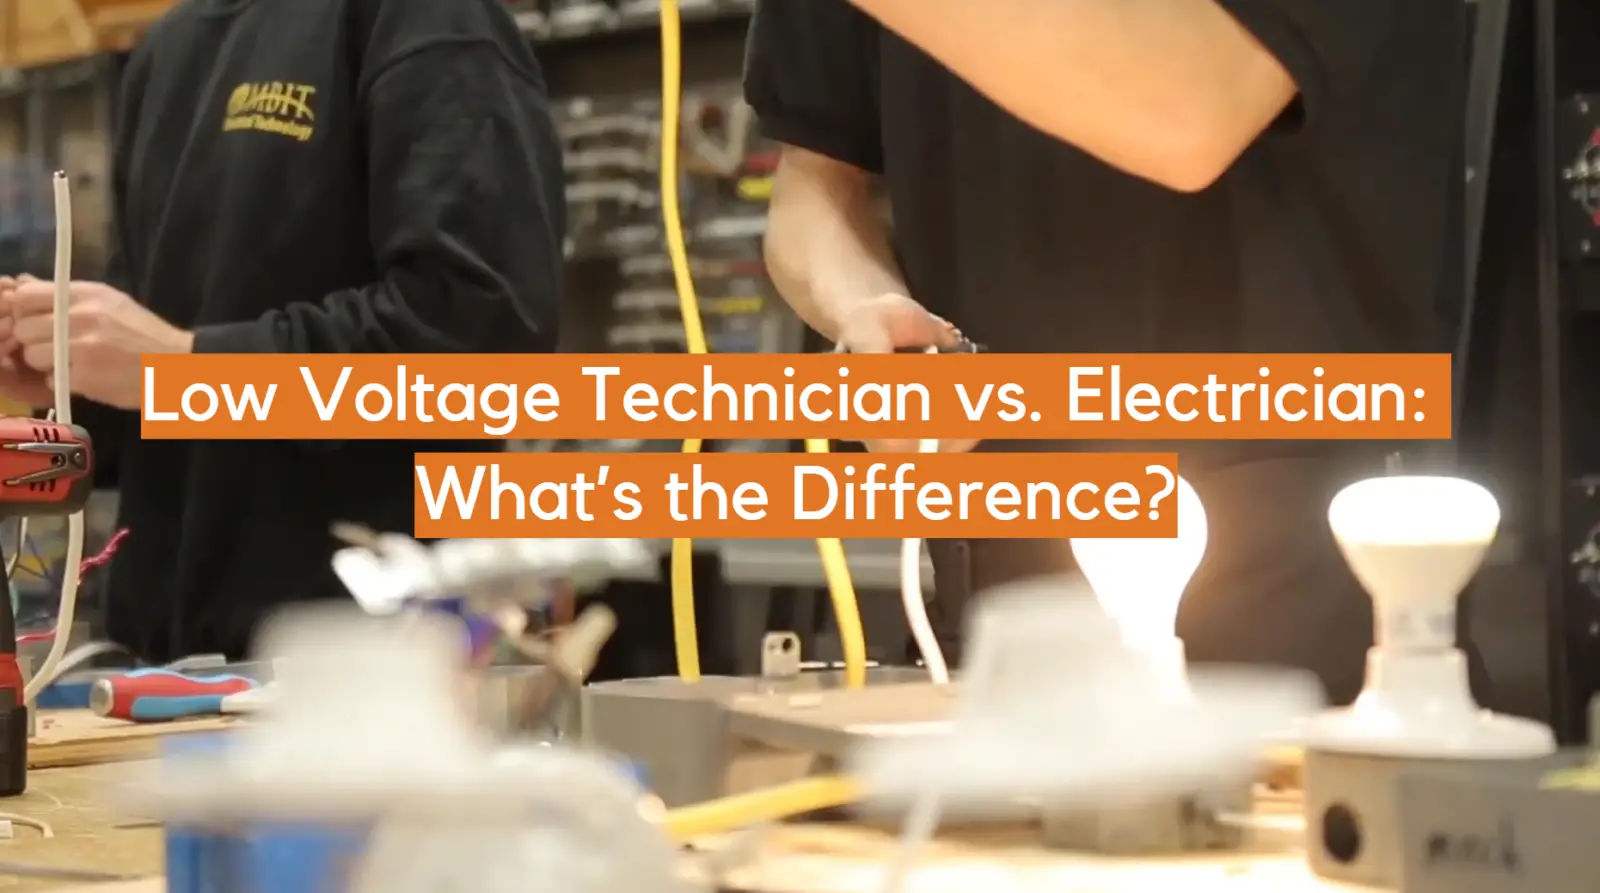 Low Voltage Technician vs. Electrician: What’s the Difference?